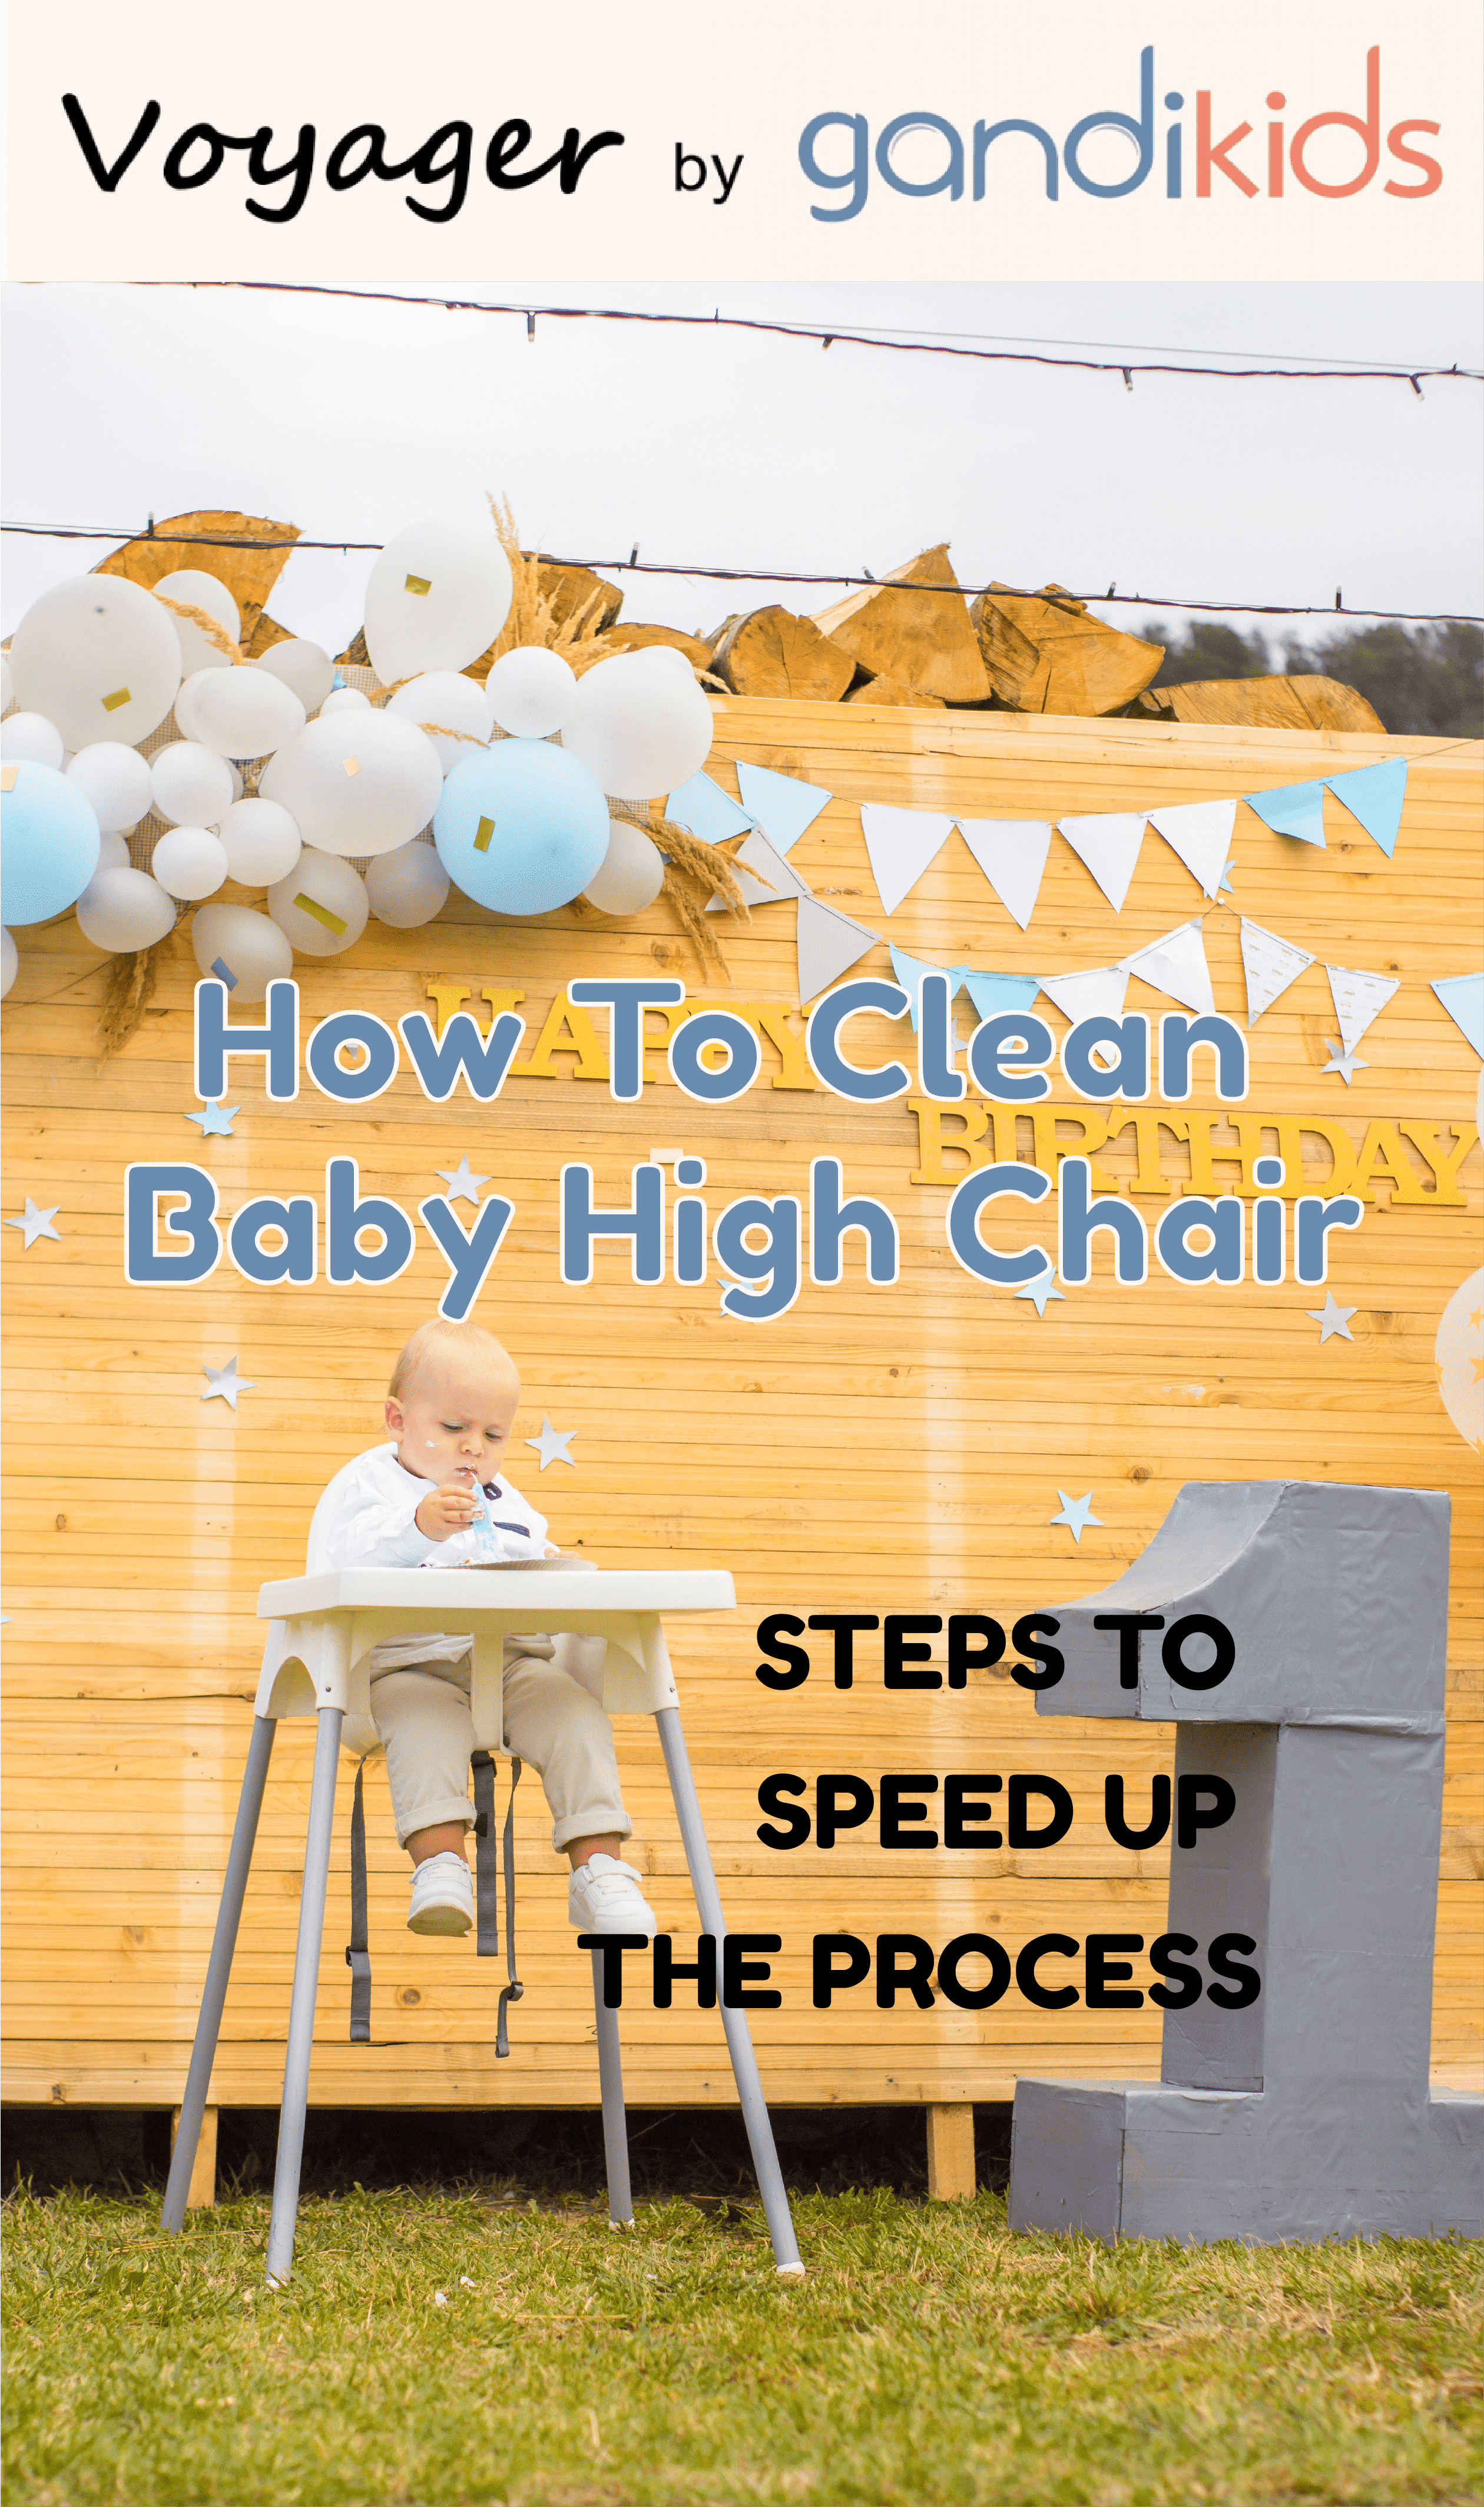 How to clean baby high chair